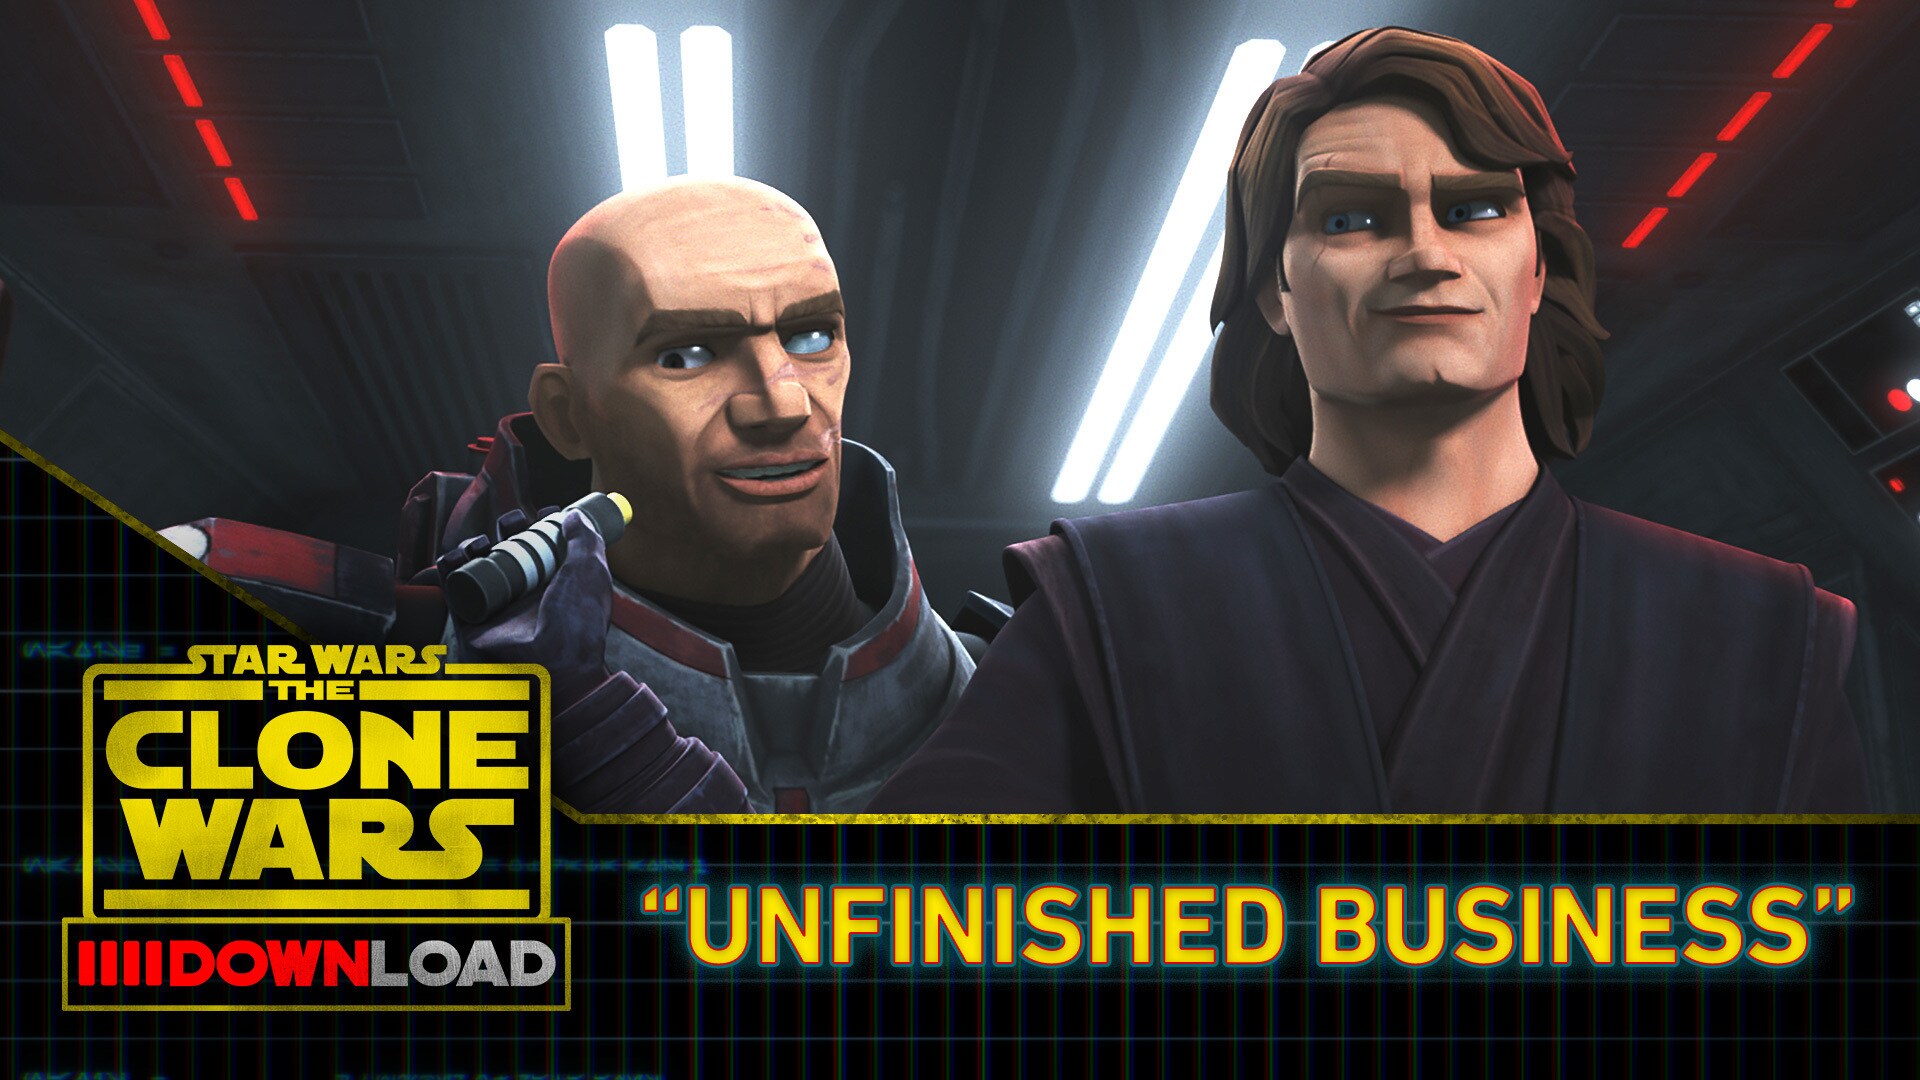 Clone Wars Download: "Unfinished Business"